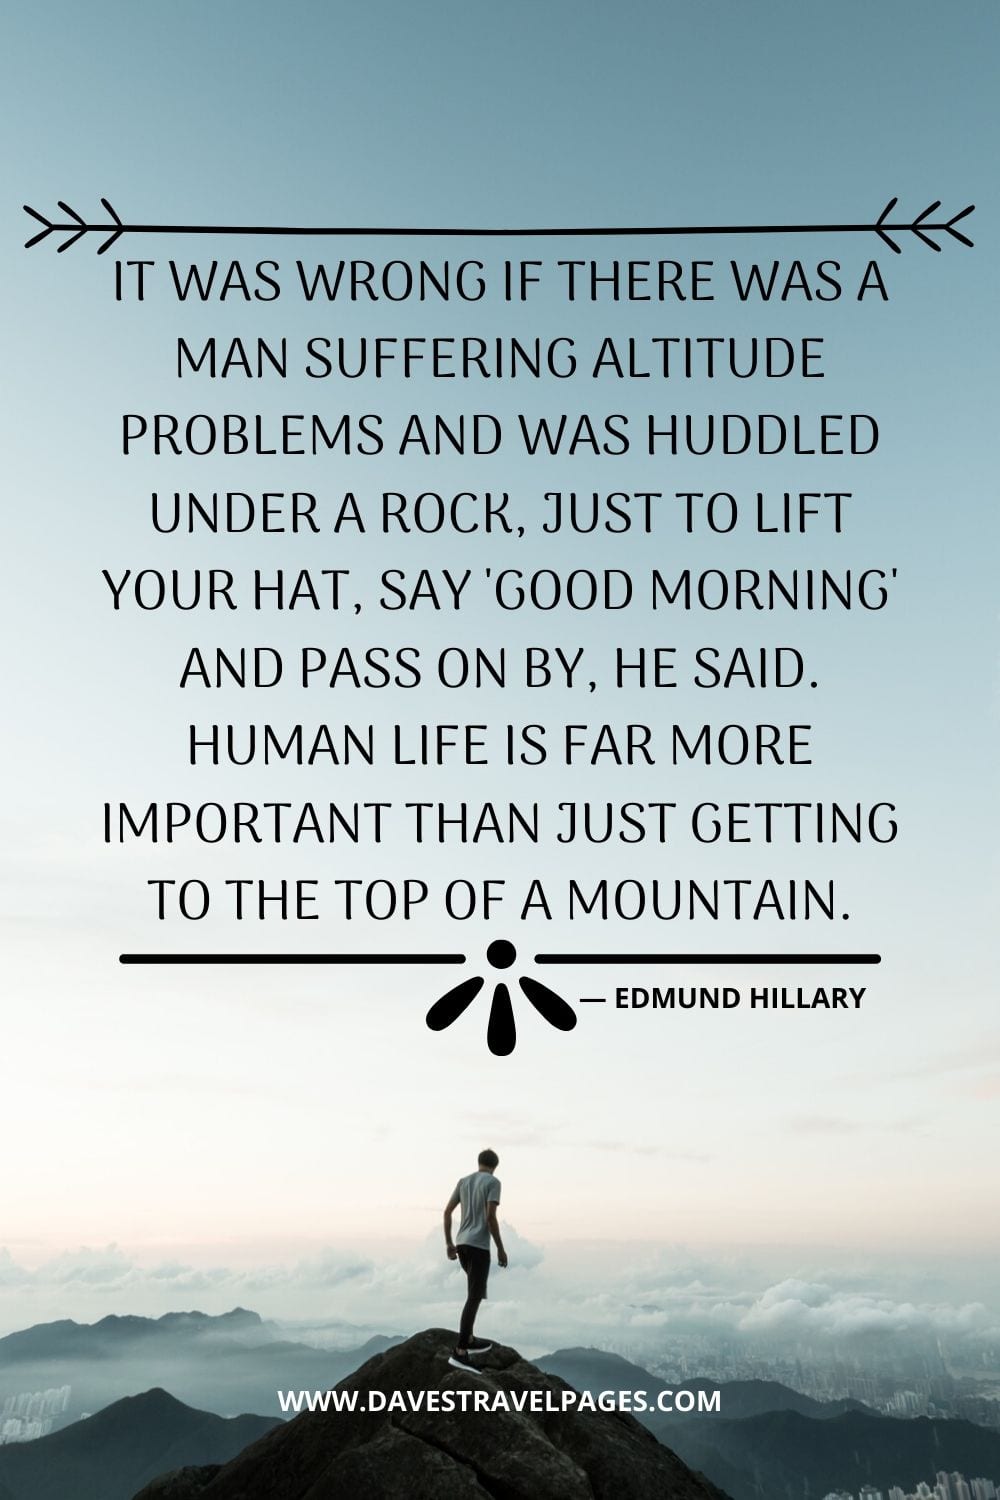 “It was wrong if there was a man suffering altitude problems and was huddled under a rock, just to lift your hat, say 'good morning' and pass on by, he said. Human life is far more important than just getting to the top of a mountain.” - Edmund Hillary